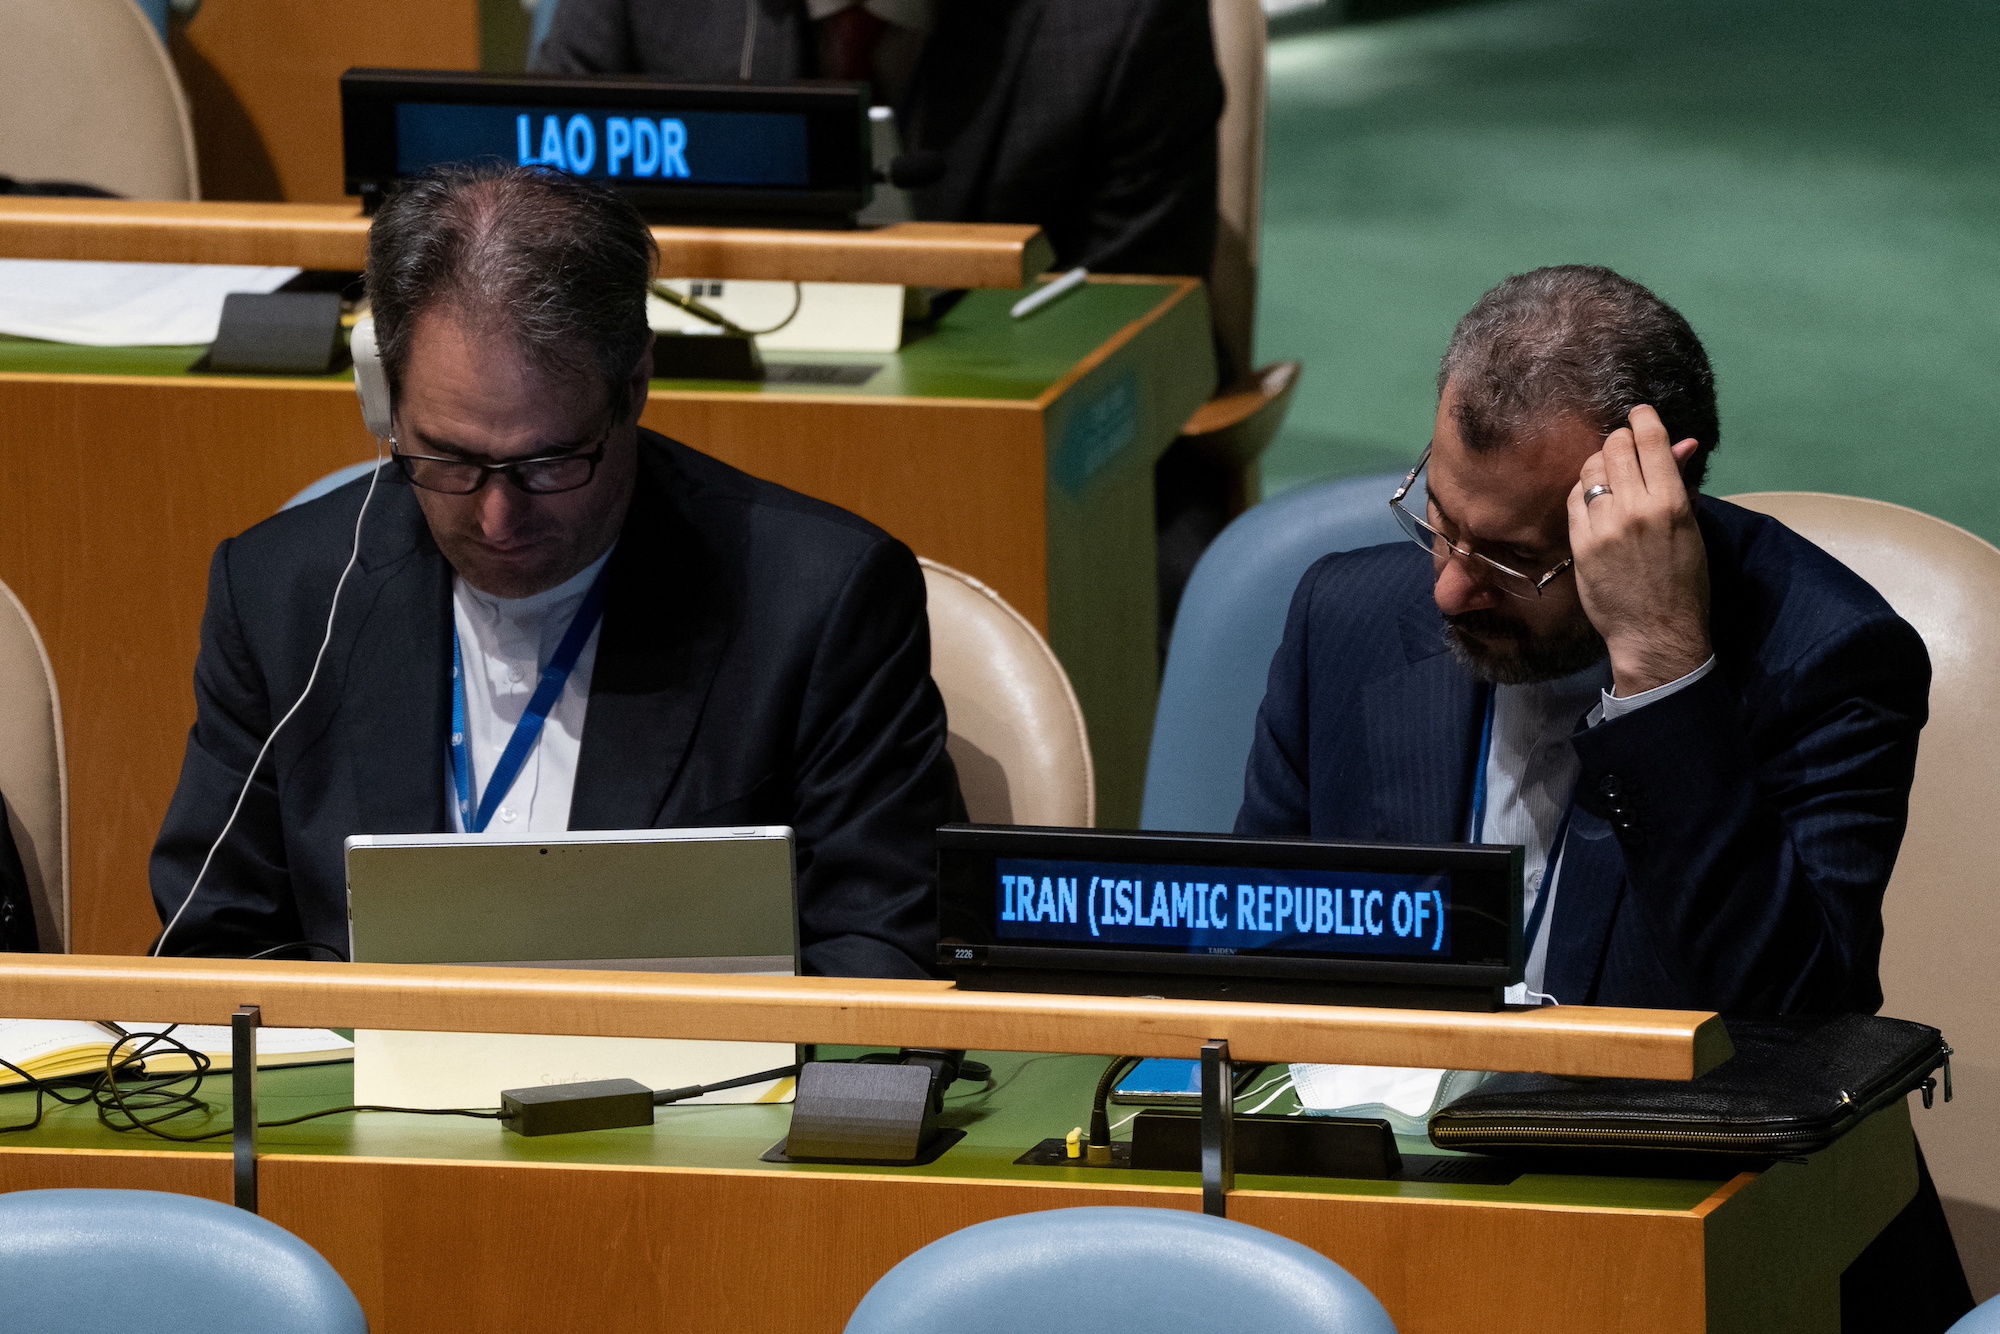 Delegates from Iran at the United Nations headquarters in New York City on August 1.